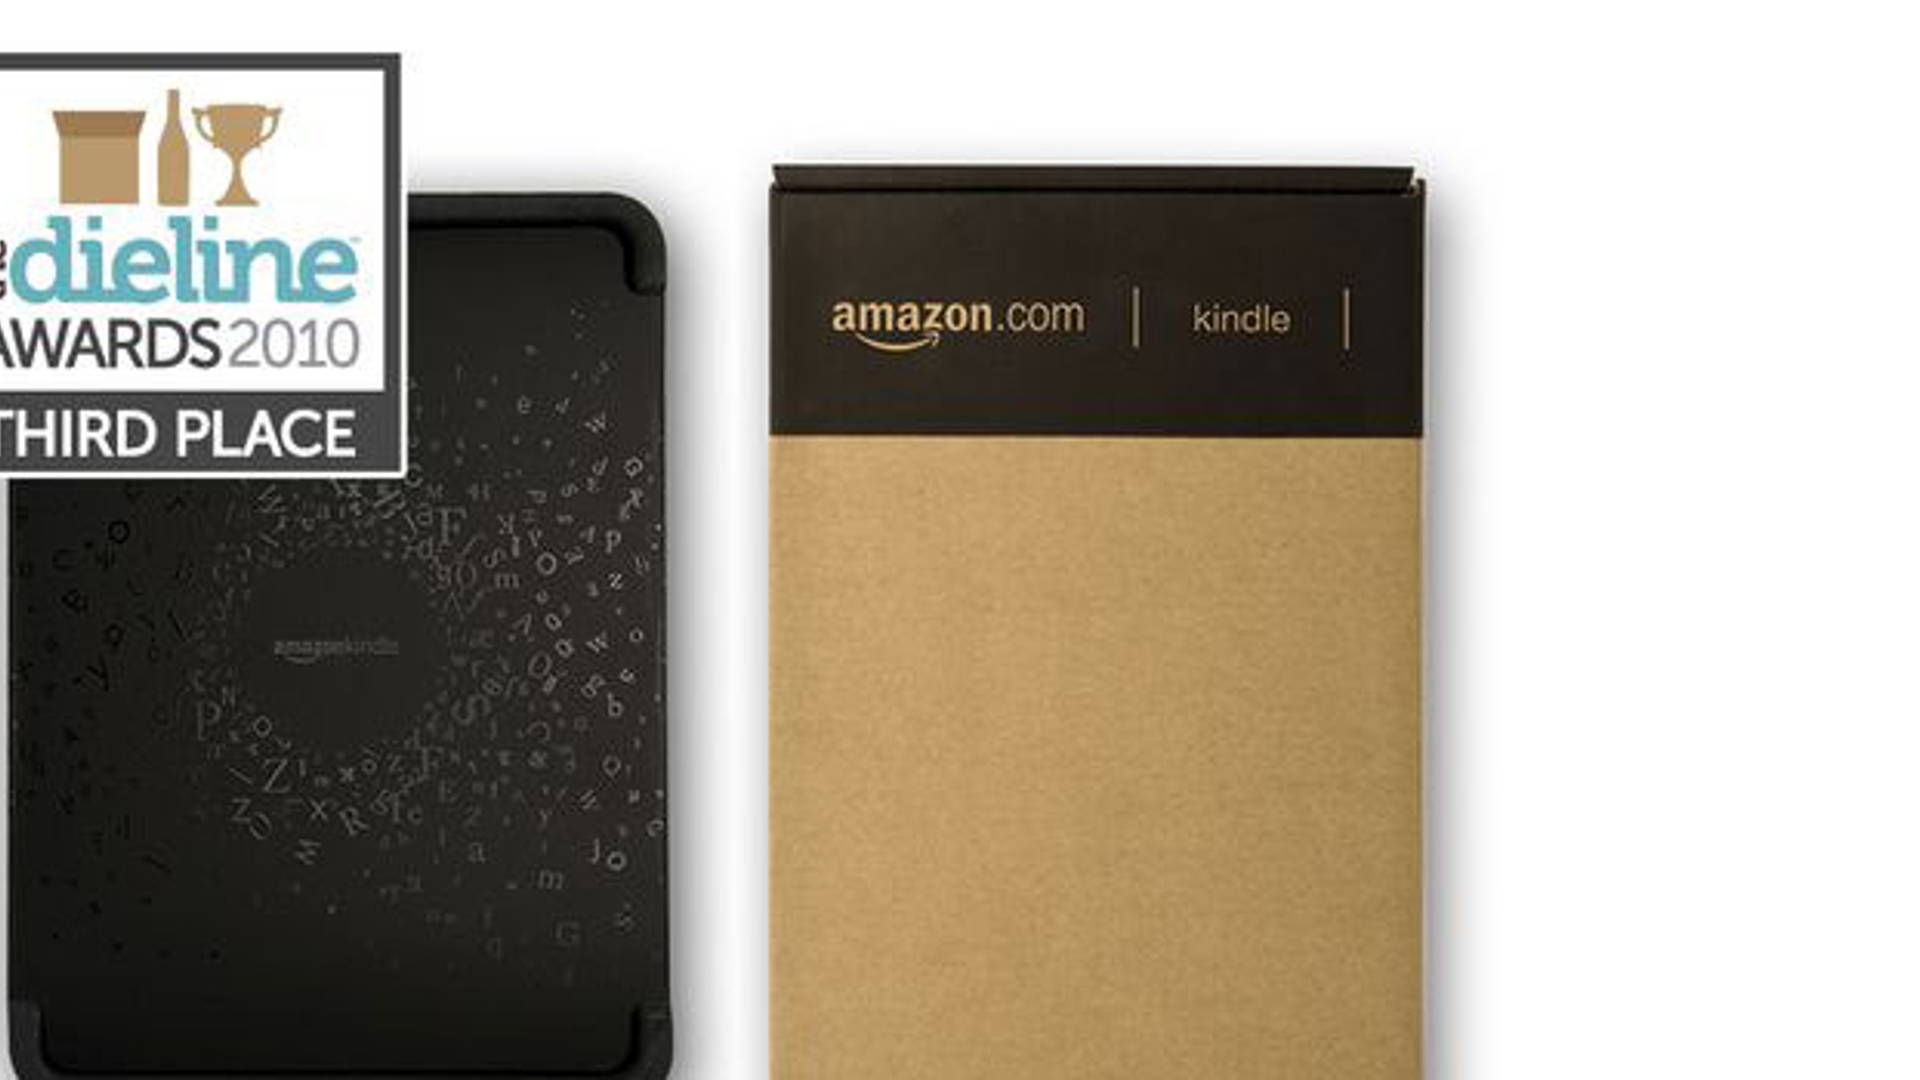 Featured image for The Dieline Awards: Third Place - Electronics, Technology, Movies, CDs - Amazon Kindle DX